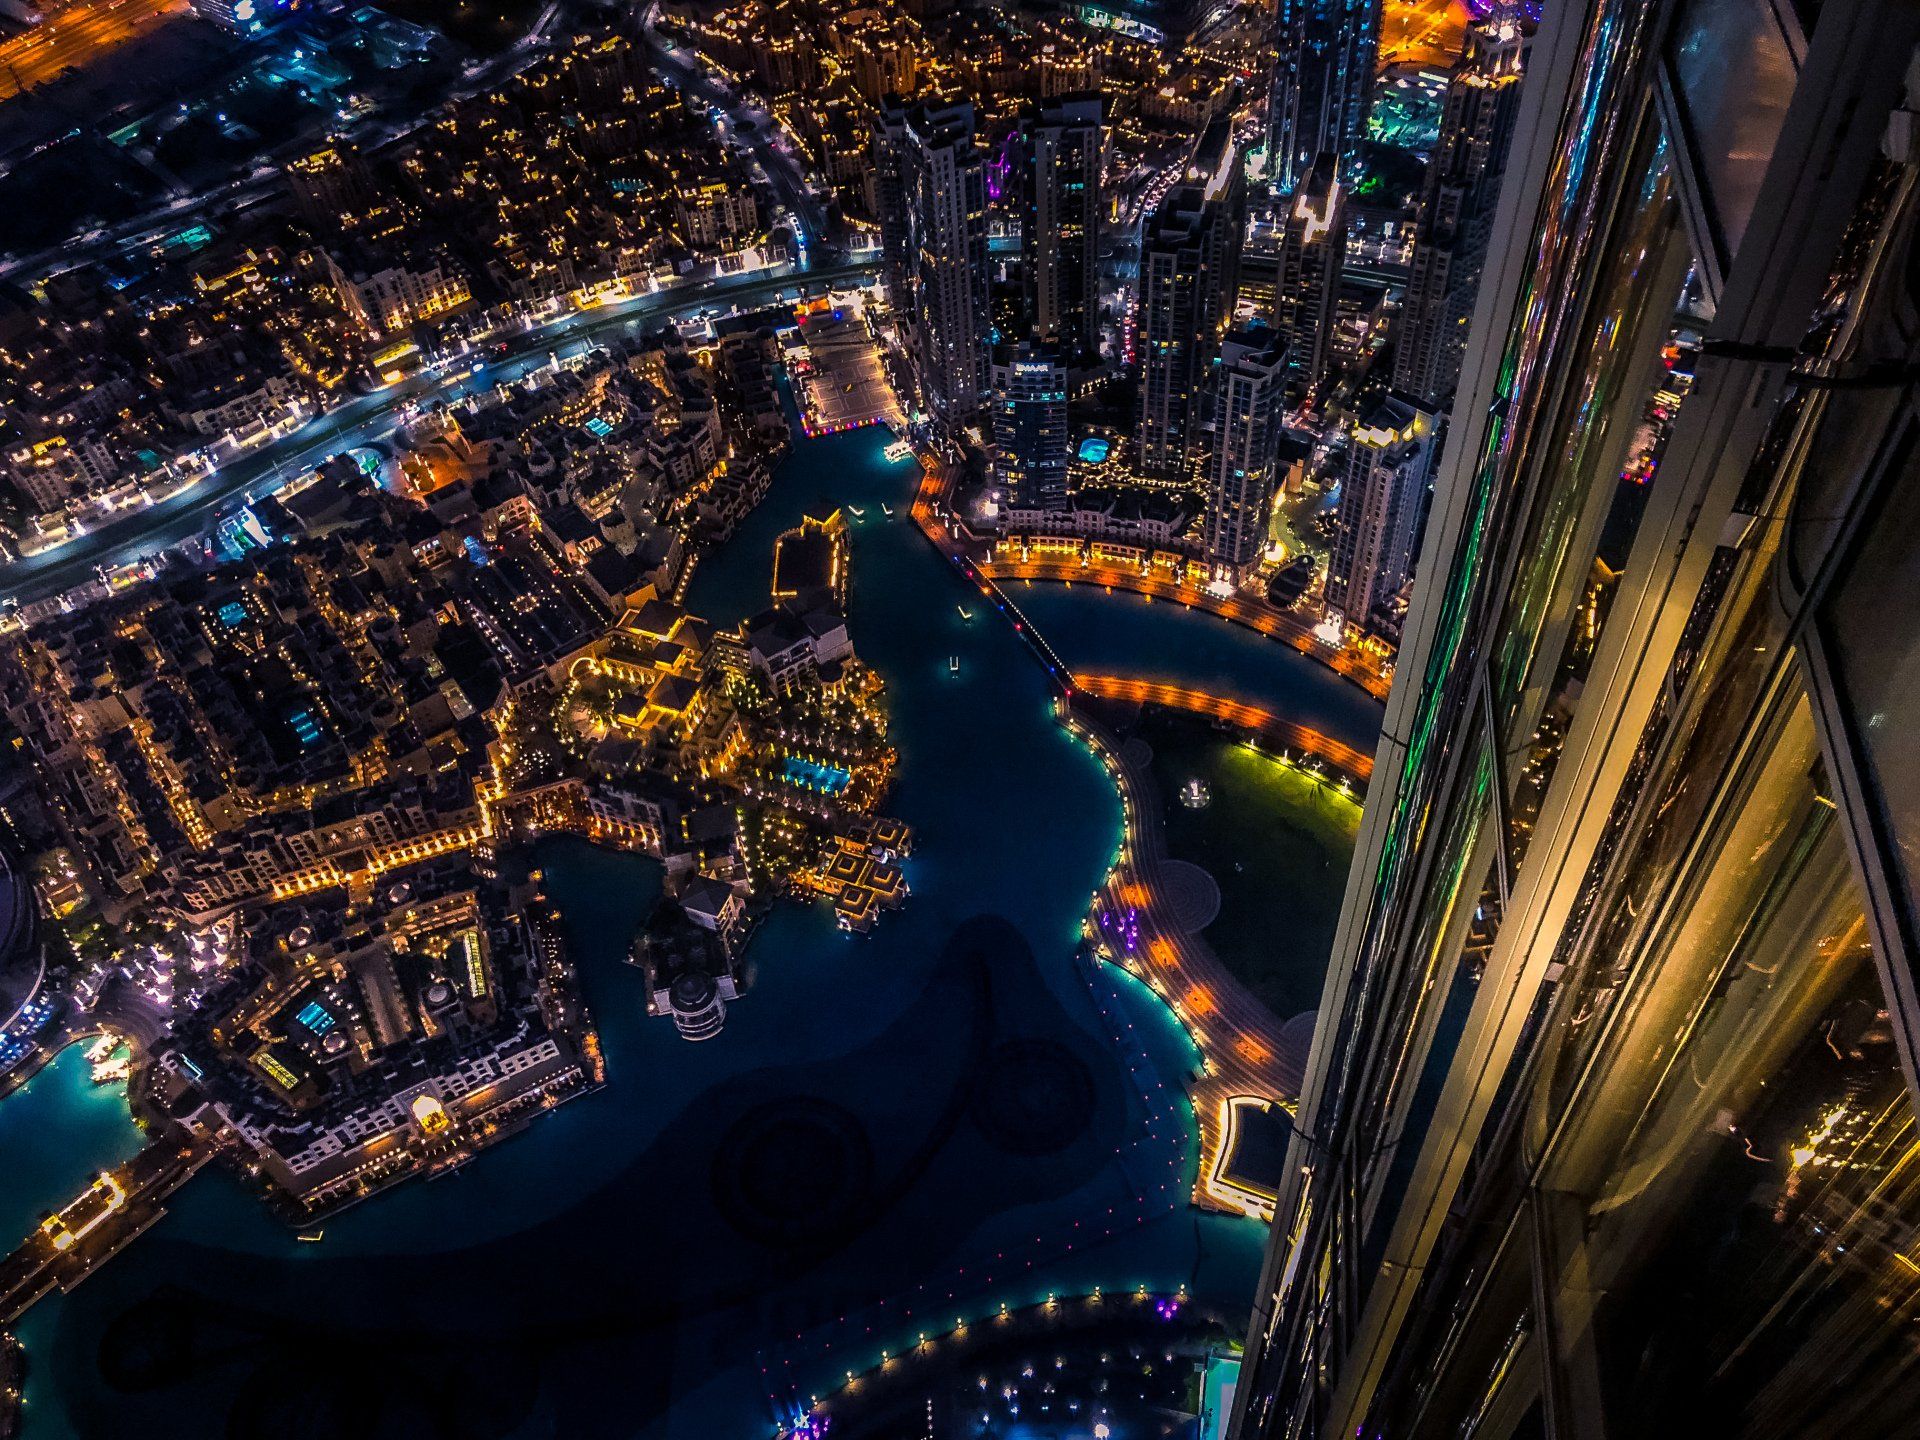 An aerial view of a city at night from the top of a building.